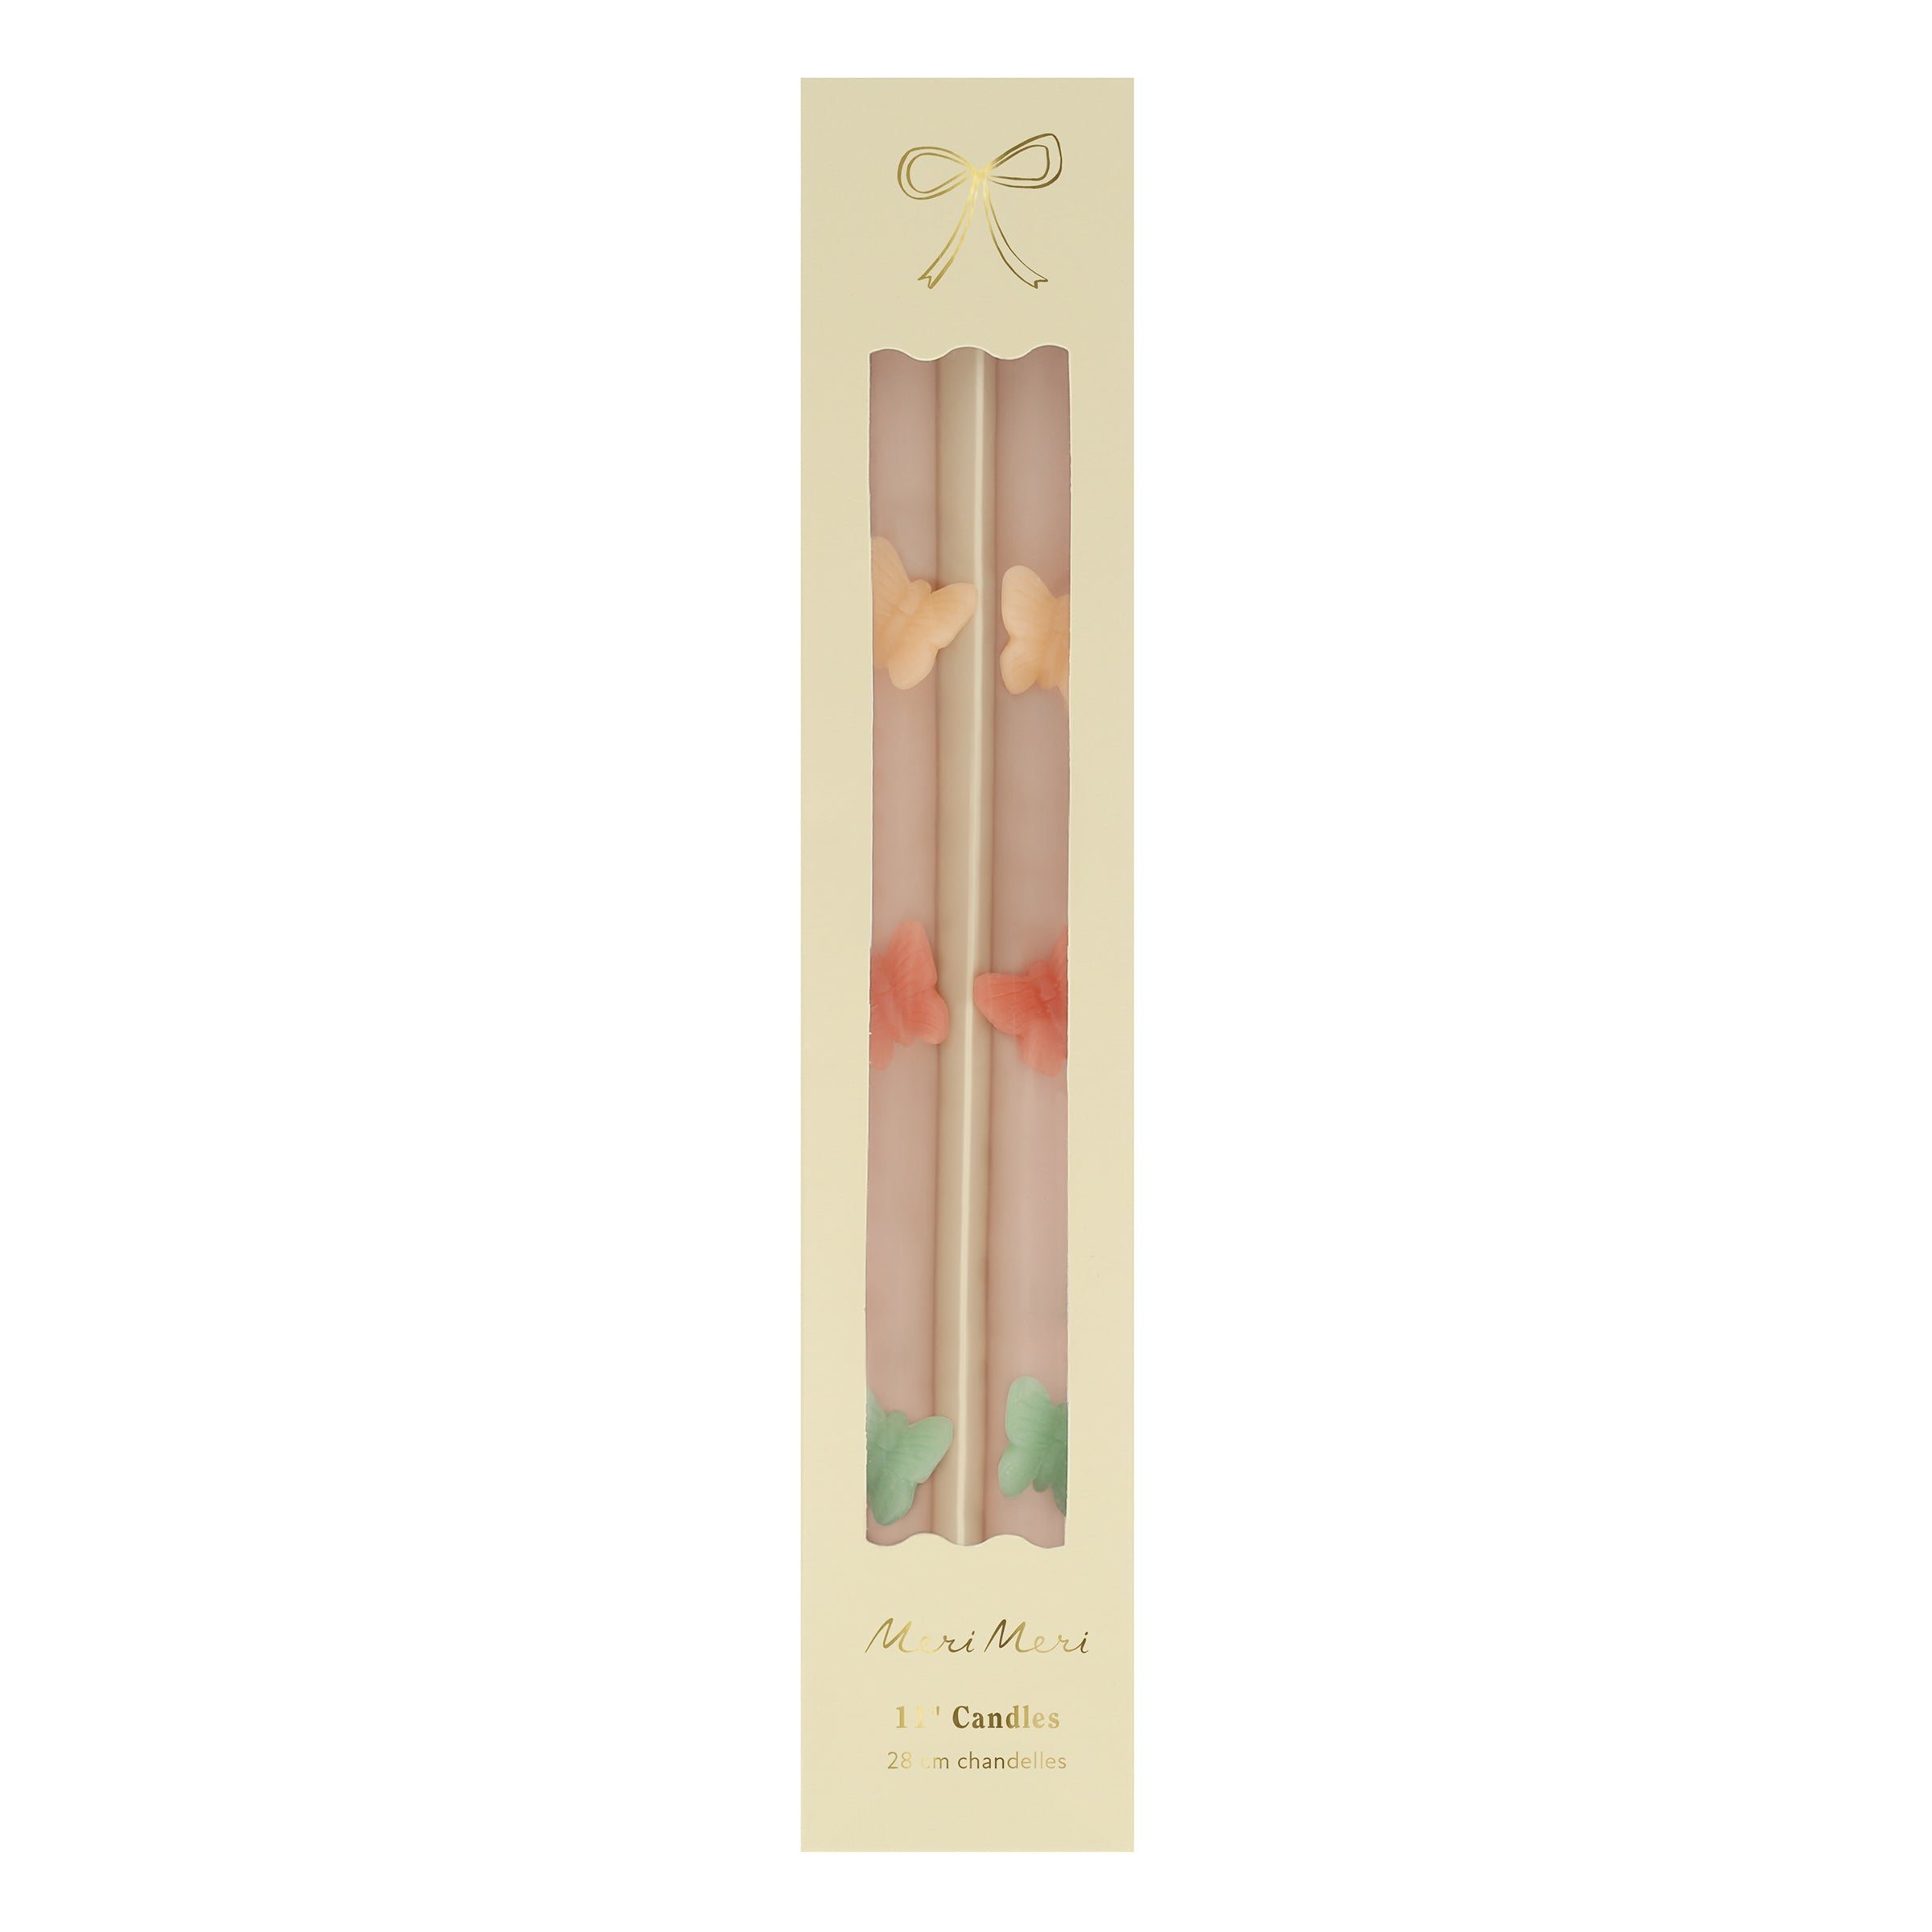 Our tall candles, in pink with colored wax butterflies, are perfect as princess party candles or fairy party candles.